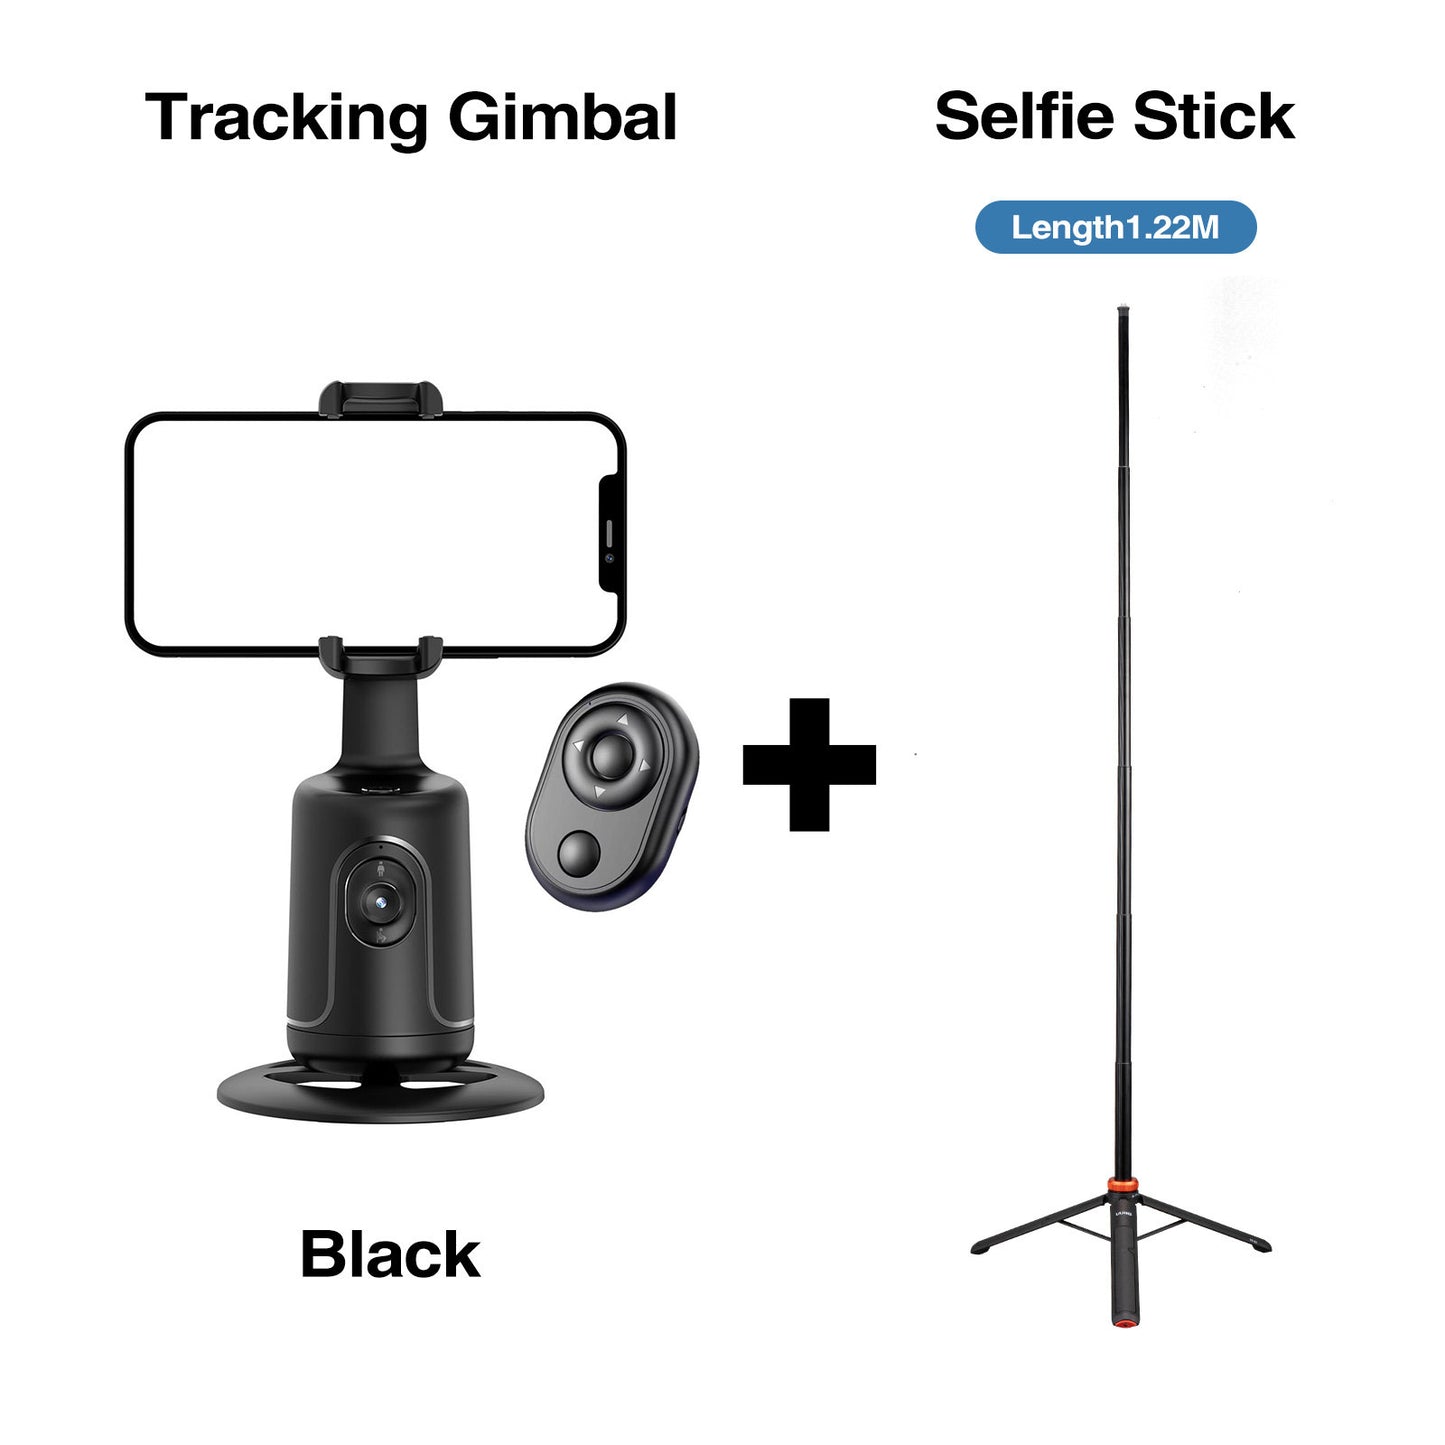 Auto Face Tracking Phone Gimbal with Remote